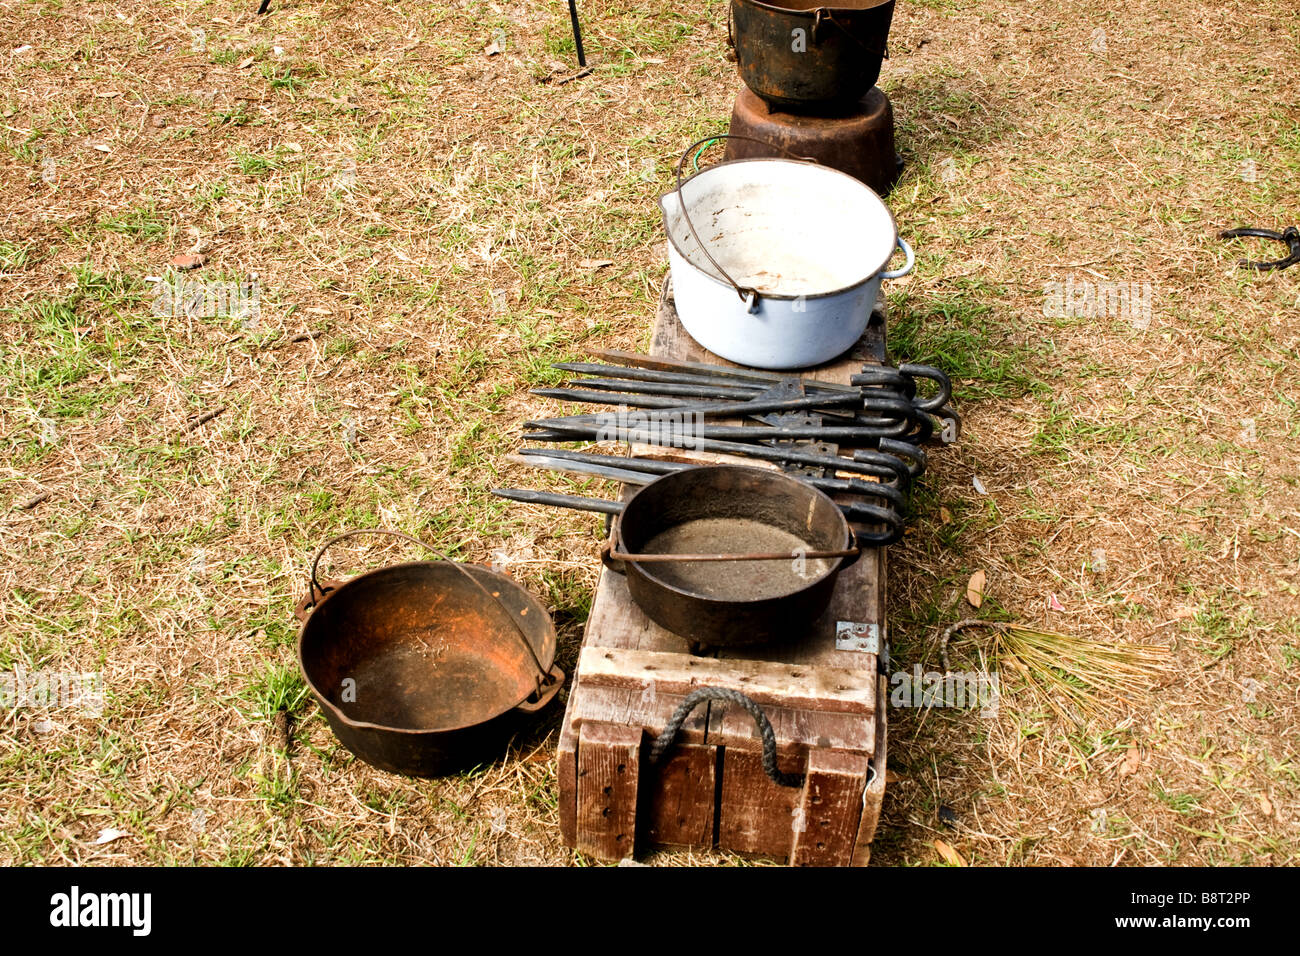 Old fashion cooking utensils and metal spikes on a wooden bench Stock Photo